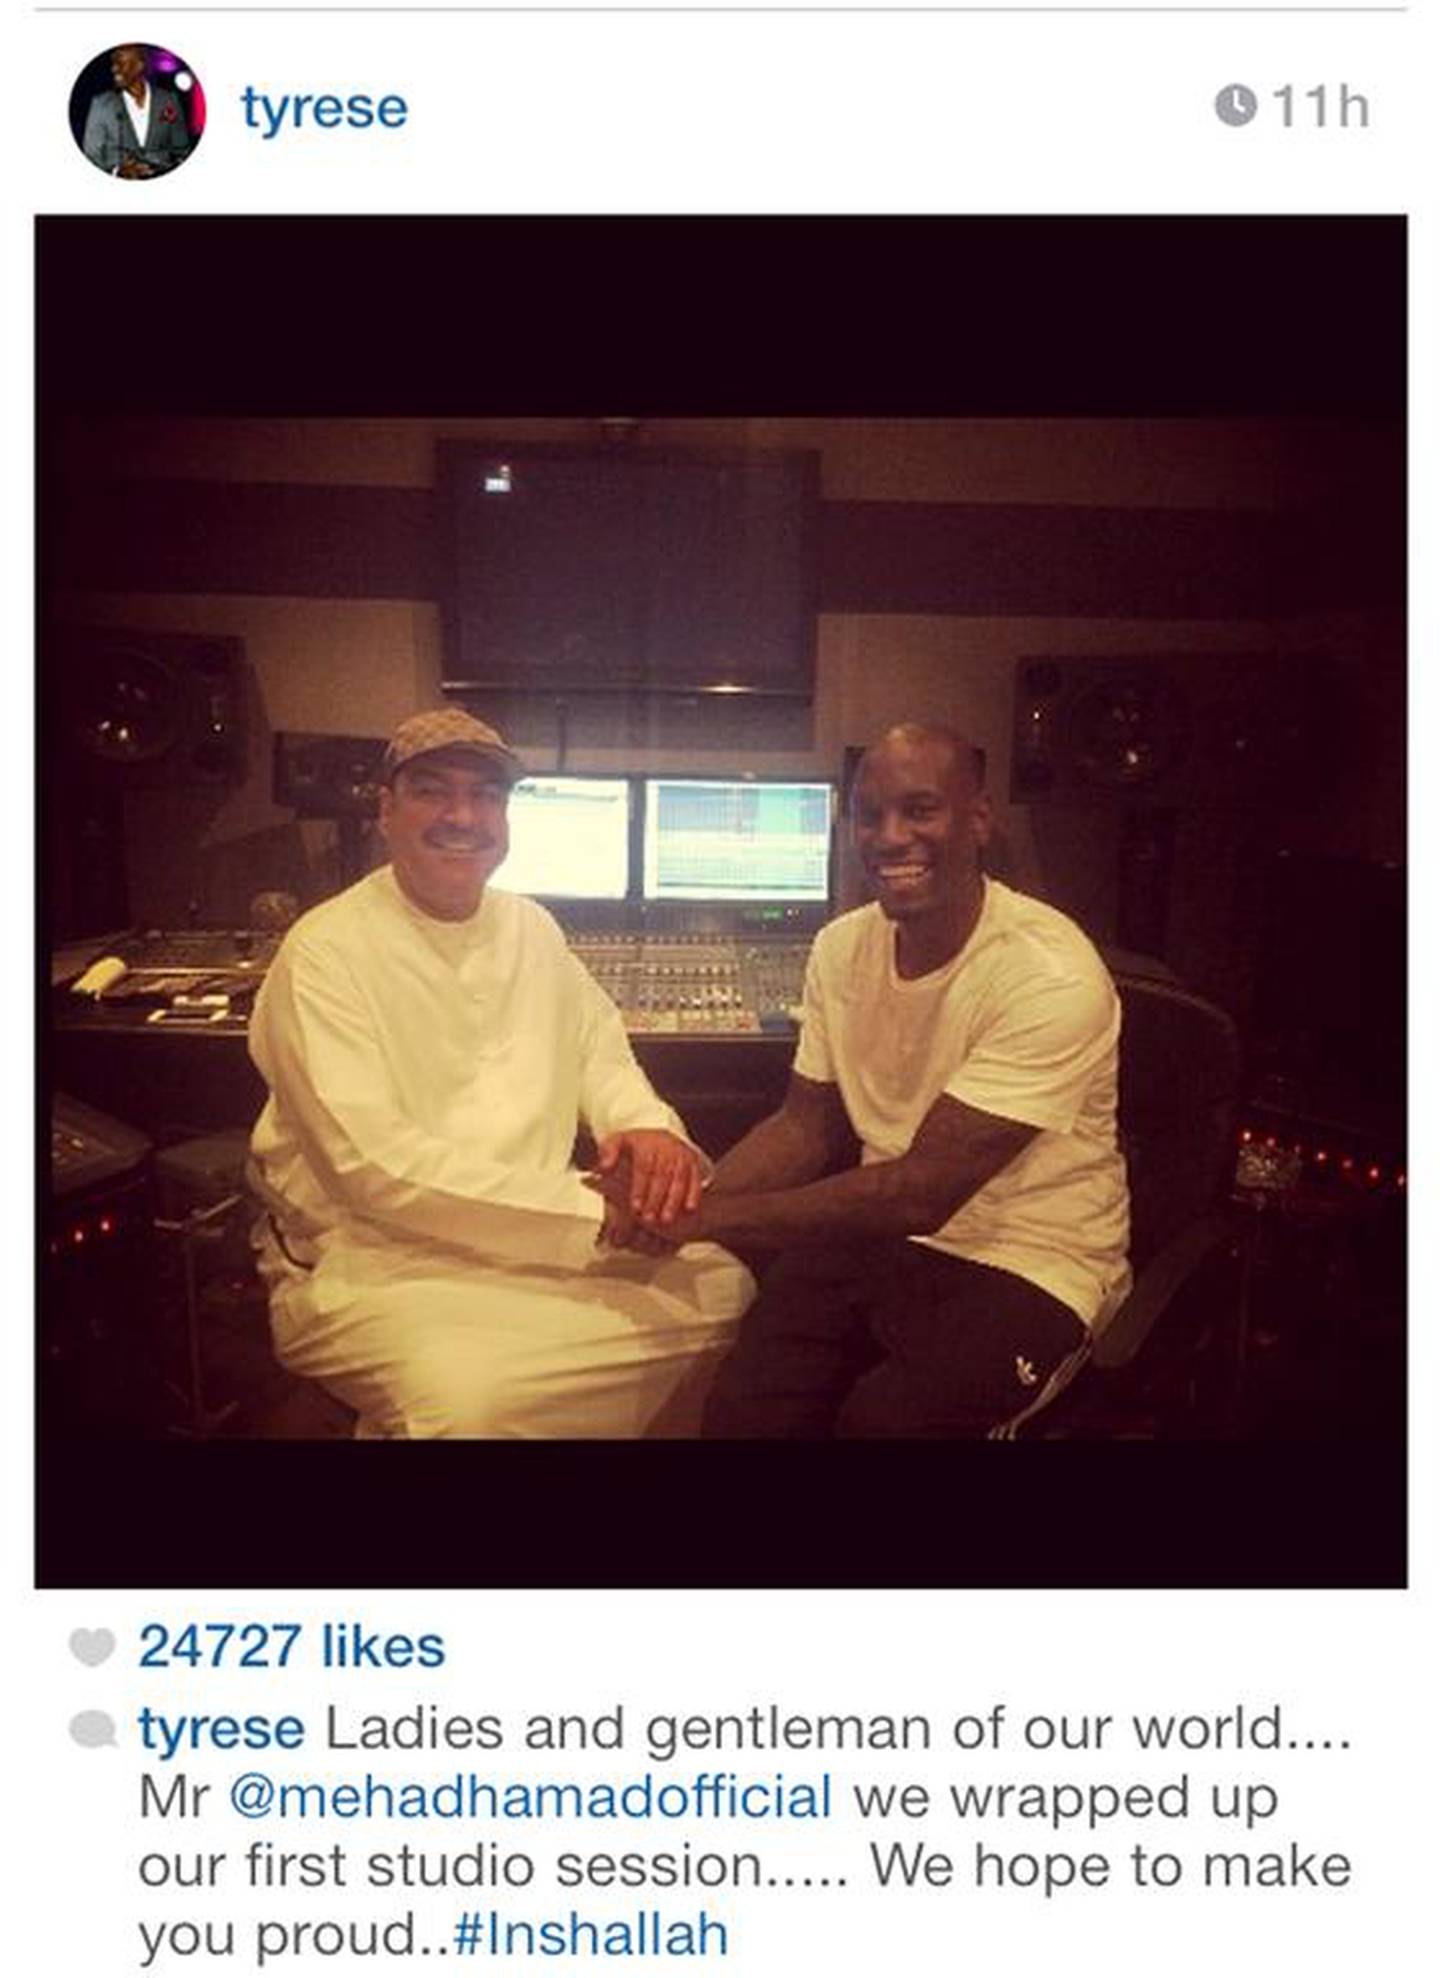 An image of Mehad Hamad and Tyrese Gibson in a recording studio that Tyrese posted on Instagram in 2014.